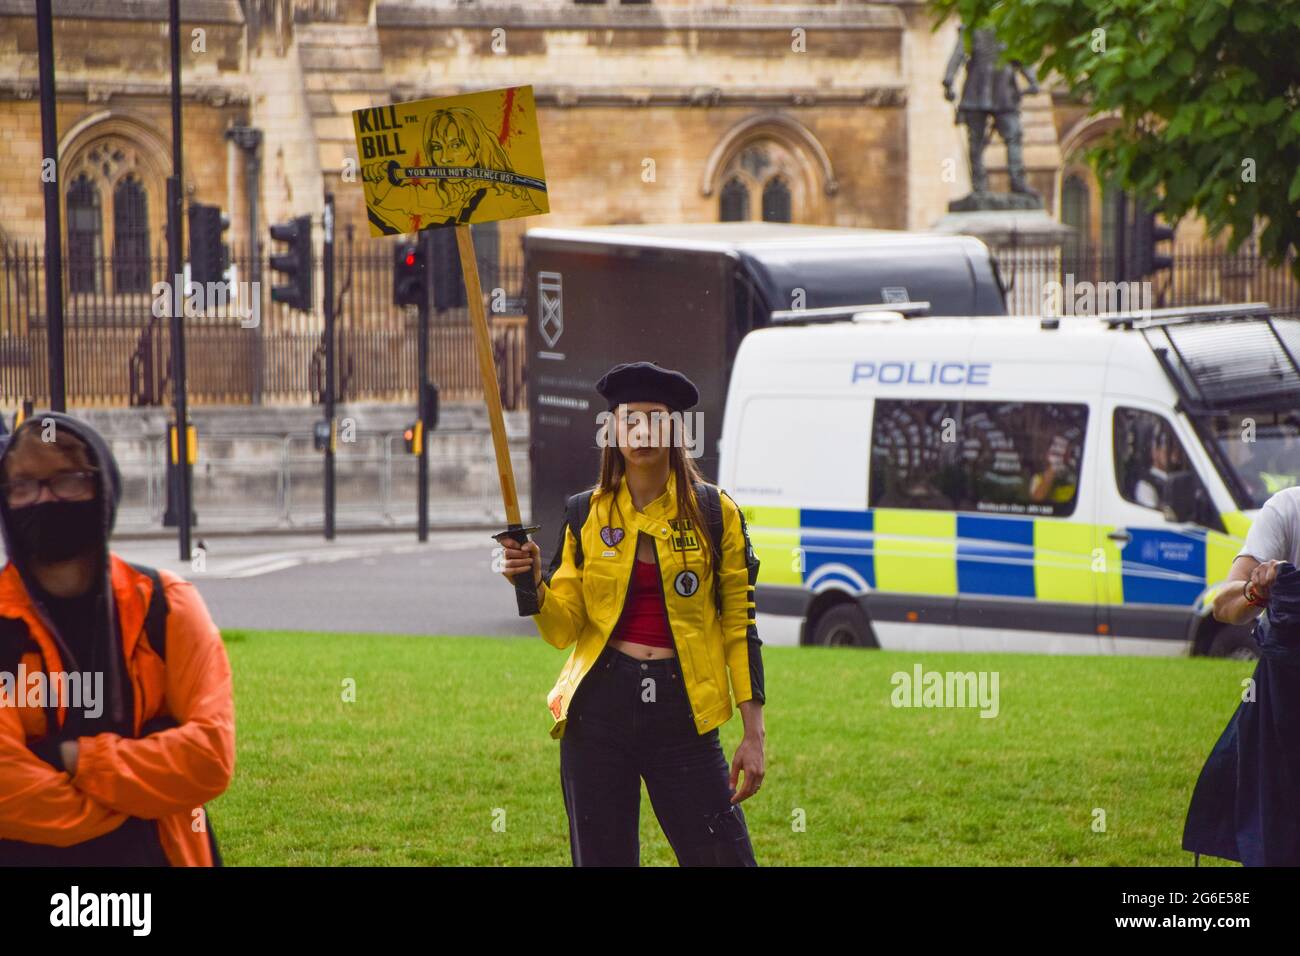 London, United Kingdom. 5th July 2021. Kill The Bill demonstrators gathered in Parliament Square in protest against the Police, Crime, Sentencing and Courts Bill, which many say would give police more powers over protests in the UK. Stock Photo